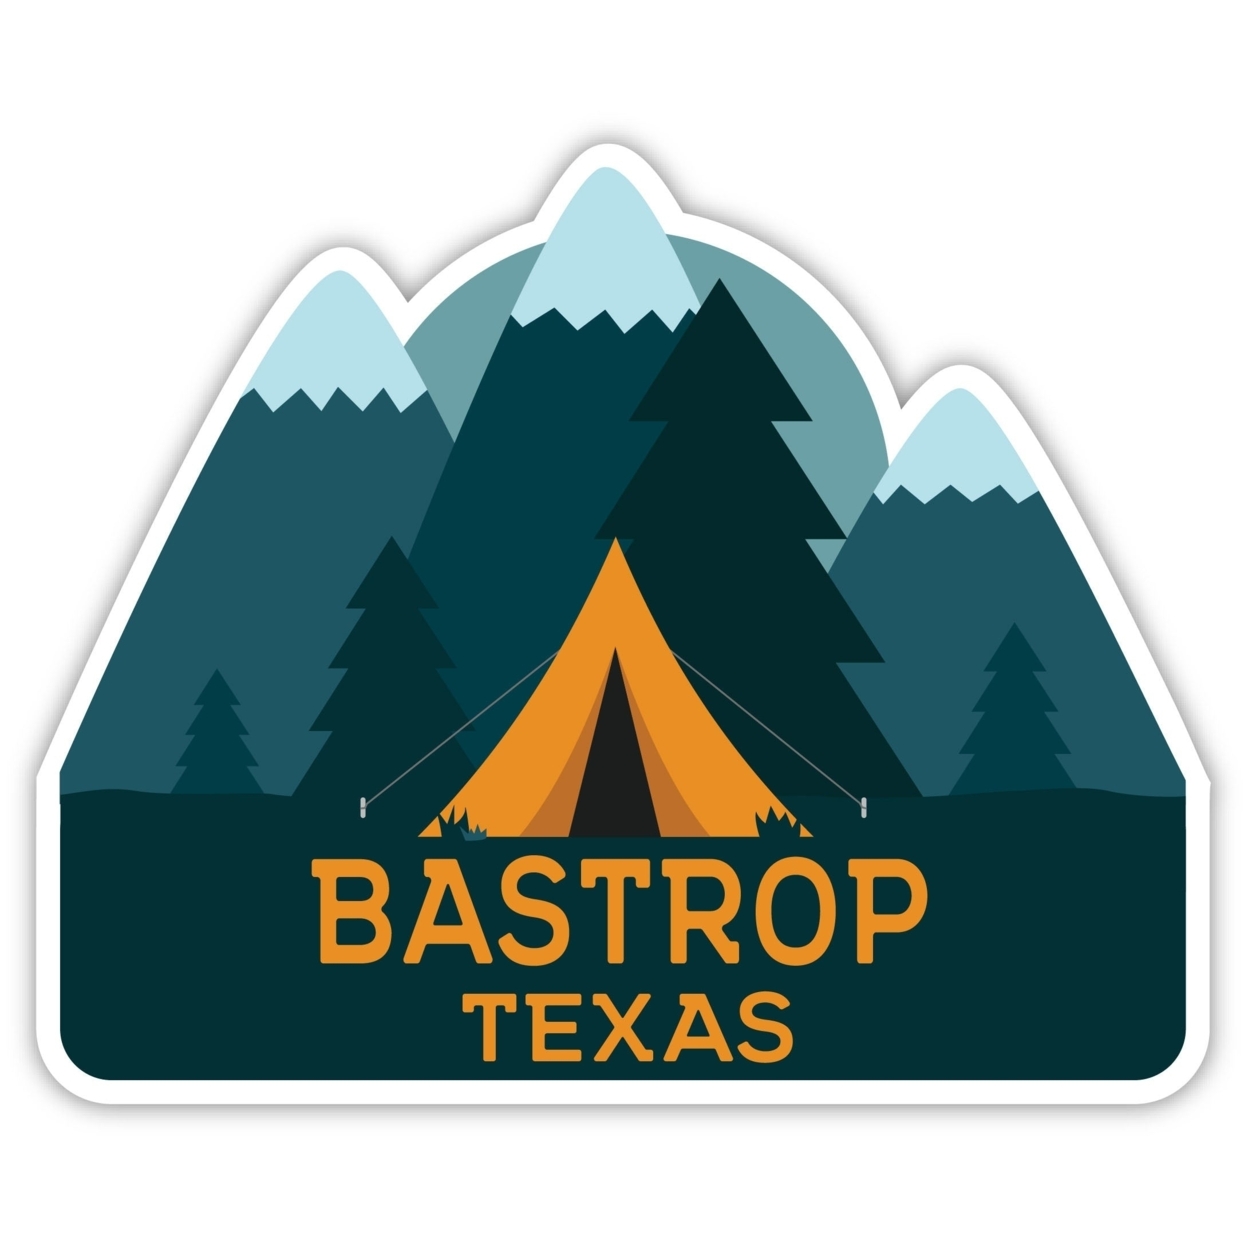 Bastrop Texas Souvenir Decorative Stickers (Choose Theme And Size) - 4-Pack, 10-Inch, Adventures Awaits